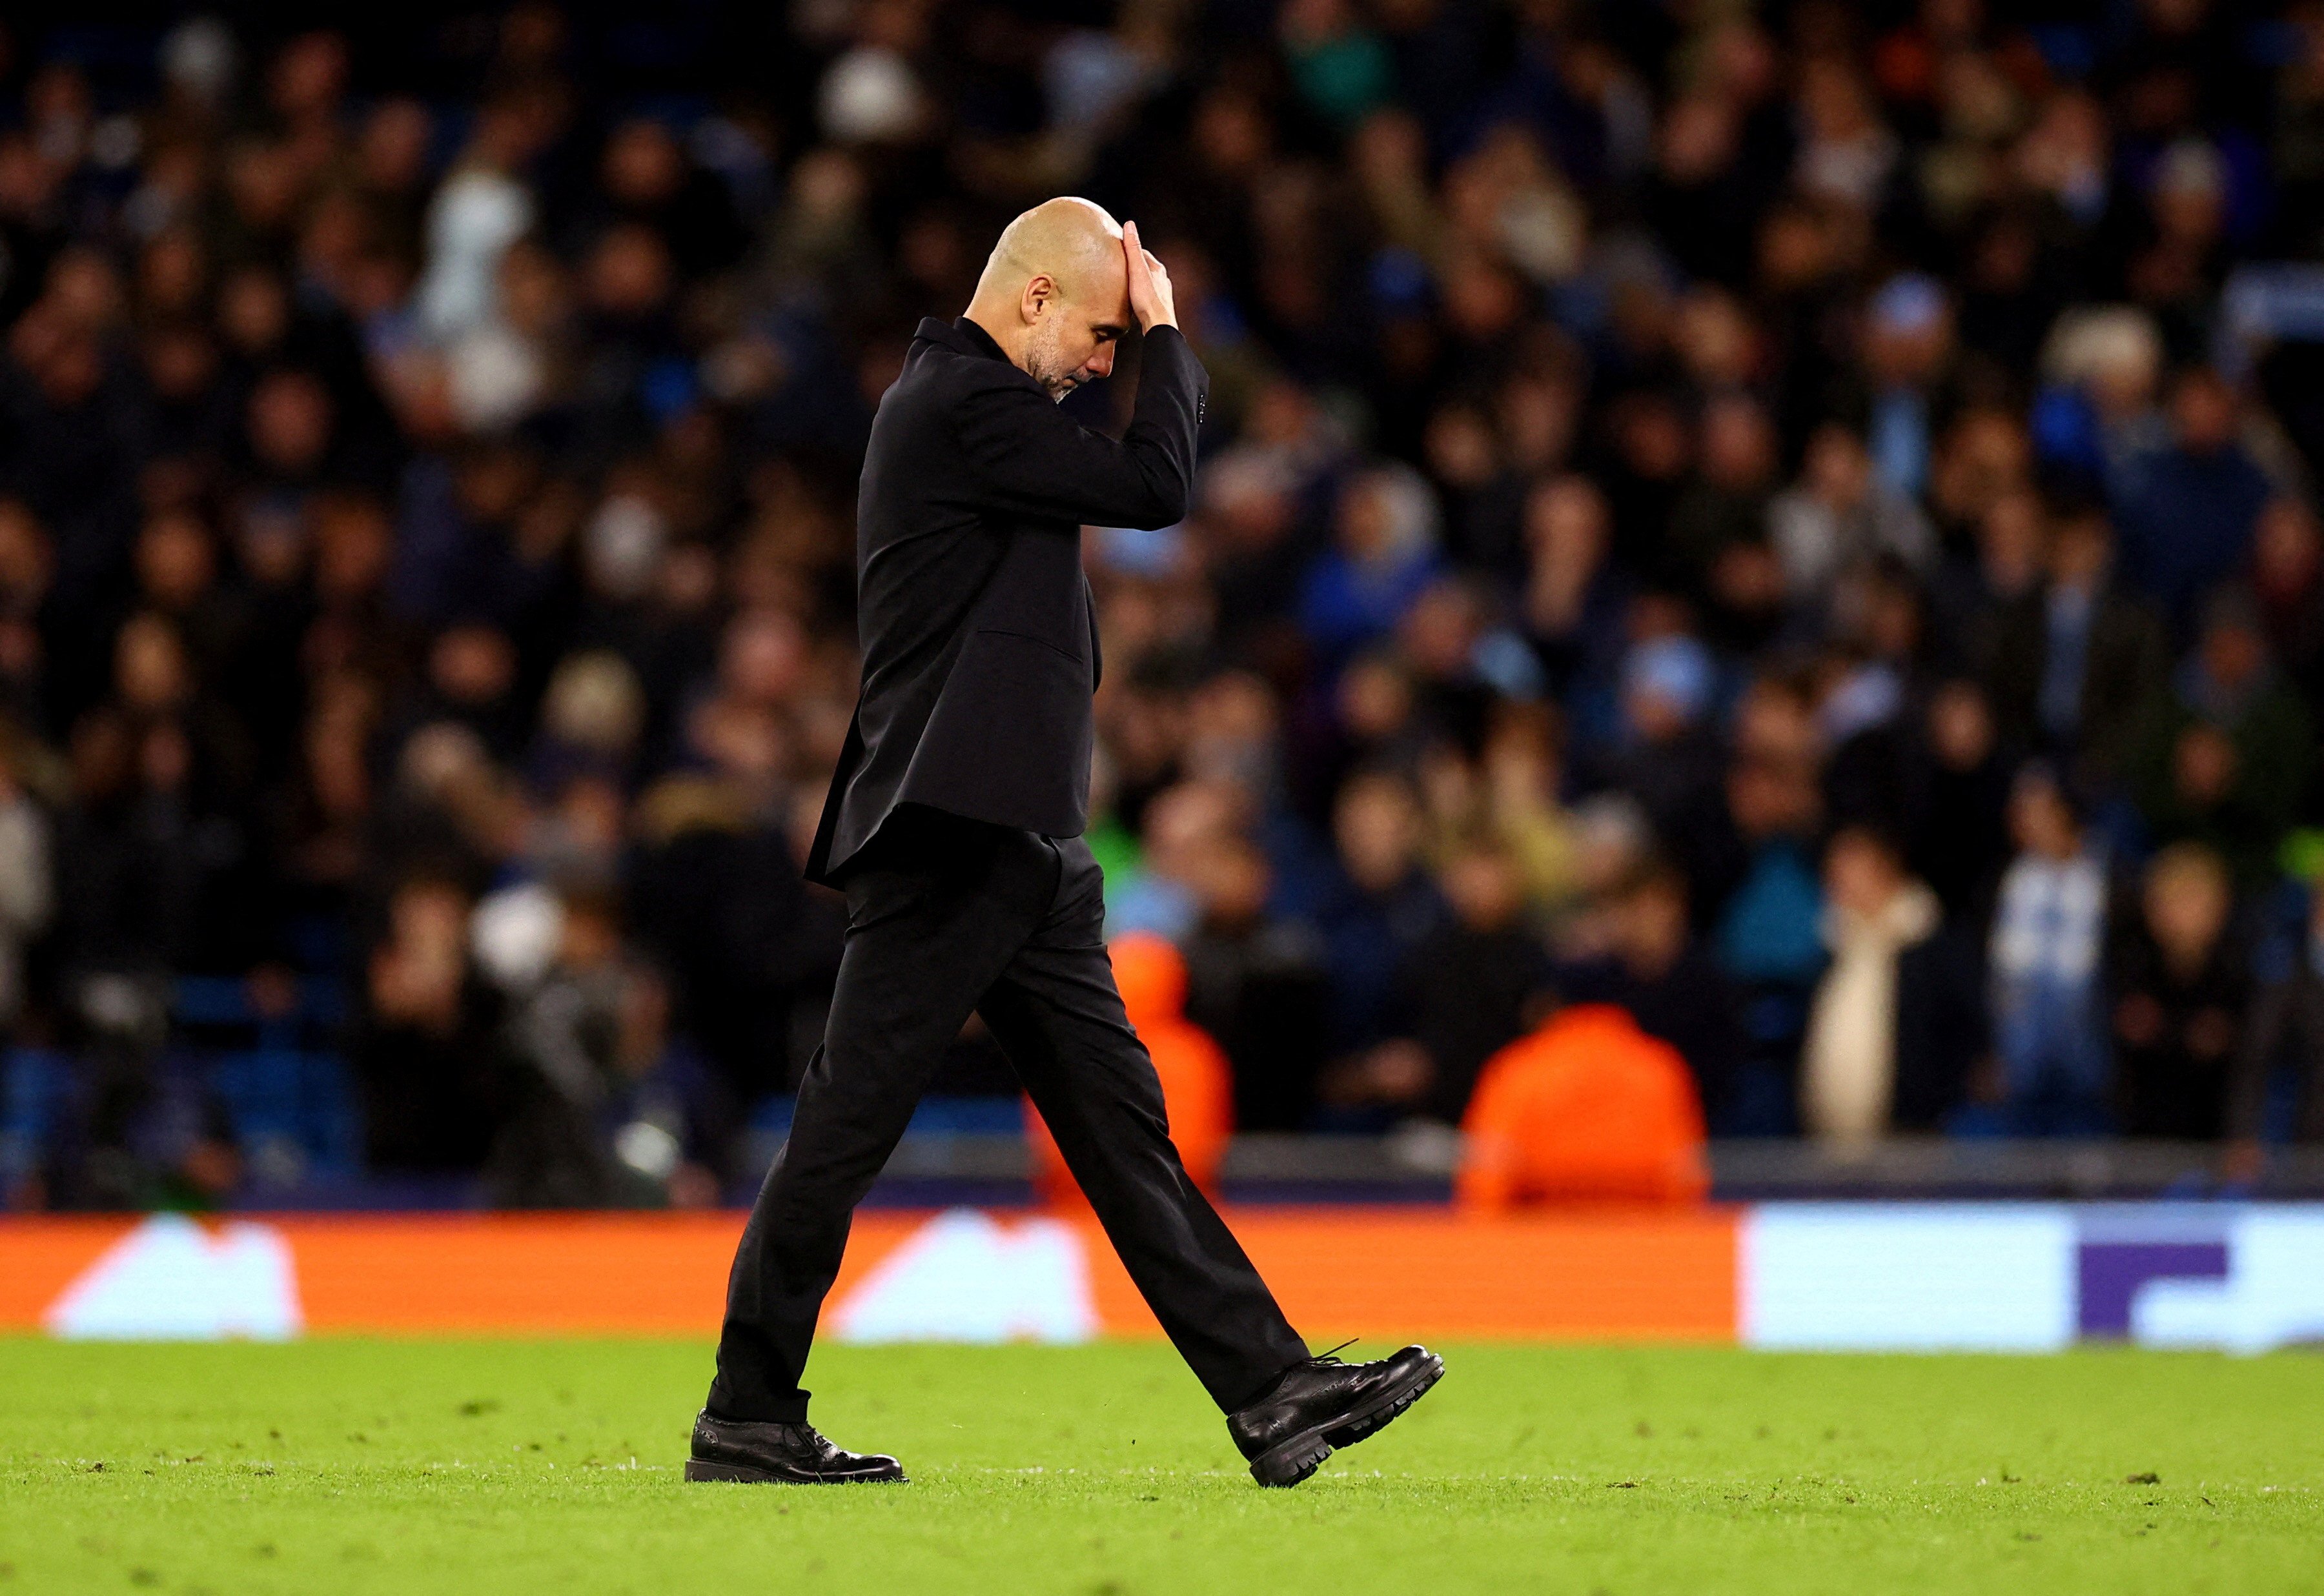 dream theatre manchester city manager pep guardiola looks dejected after losing the penalty shootout in the uefa champions league quarterfinal second leg against real madrid at etihad stadium manchester photo reuters